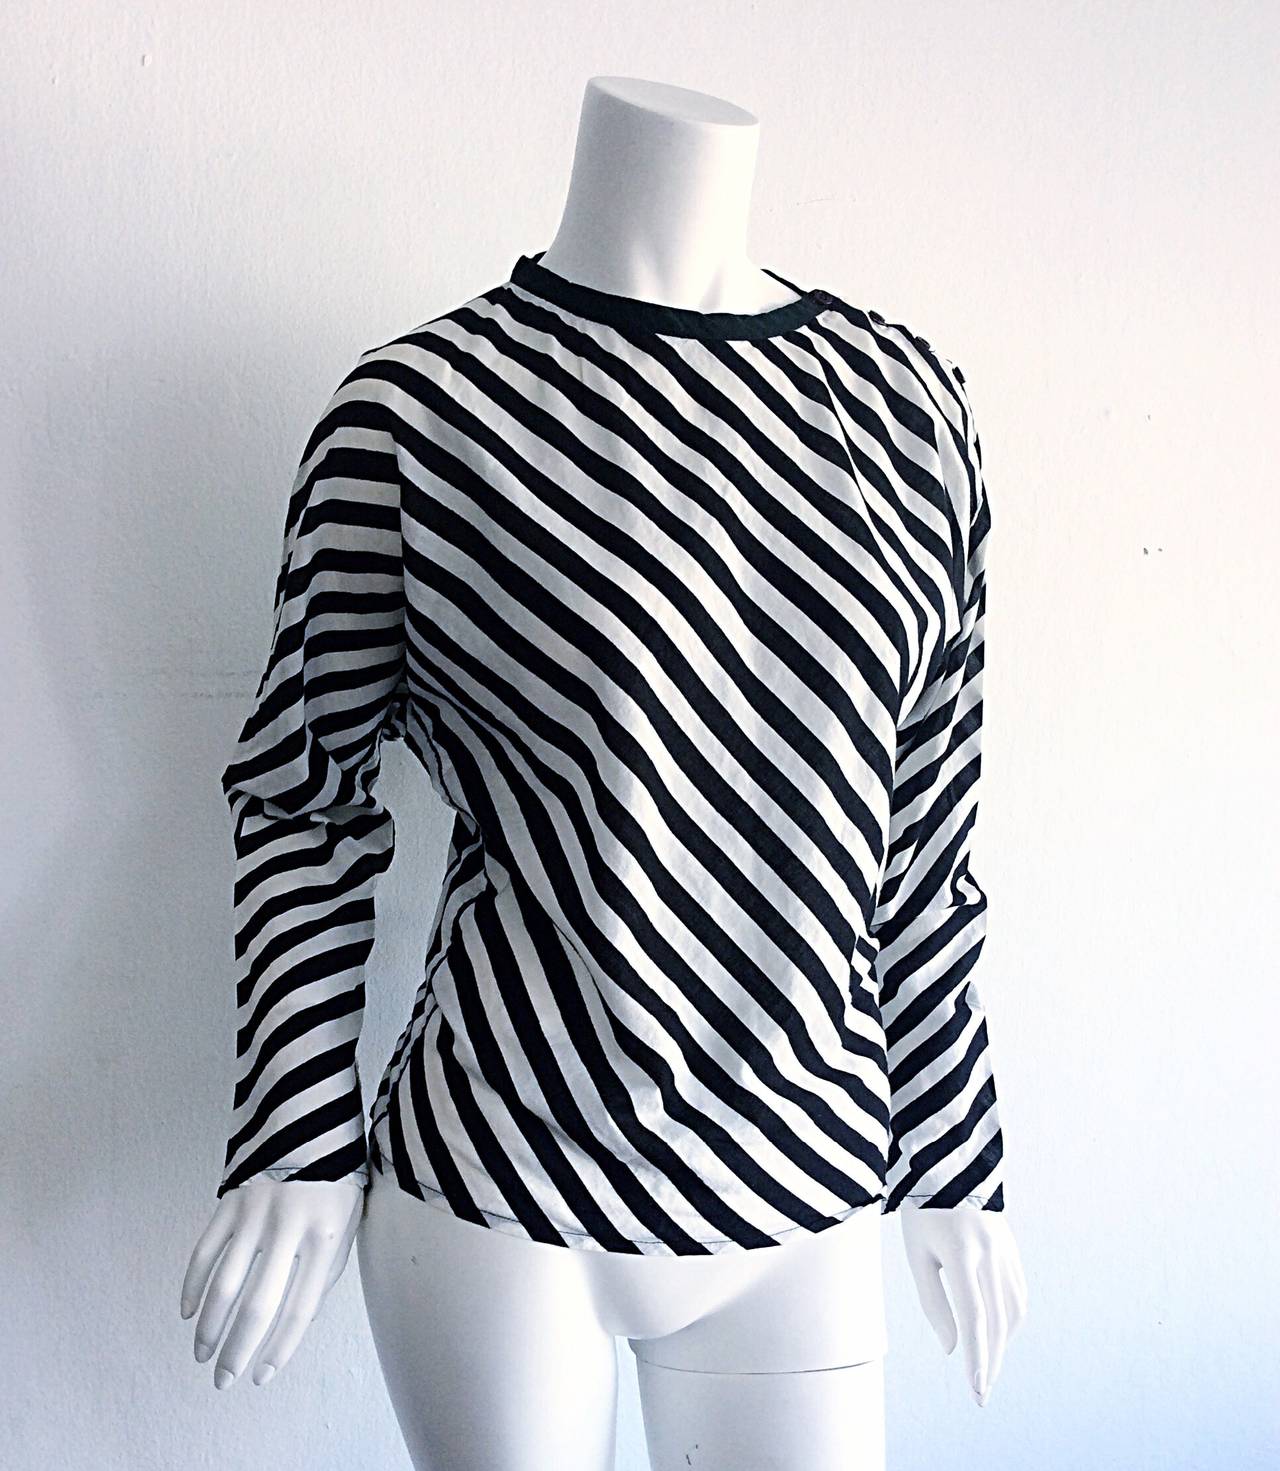 Only Koos Van Den Akker could create such a wonderful striped blouse. His pieces are being increasingly sought after, following his death earlier this month. Features buttons at collar, and dolman sleeves. 100% cotton. In great condition. Marked